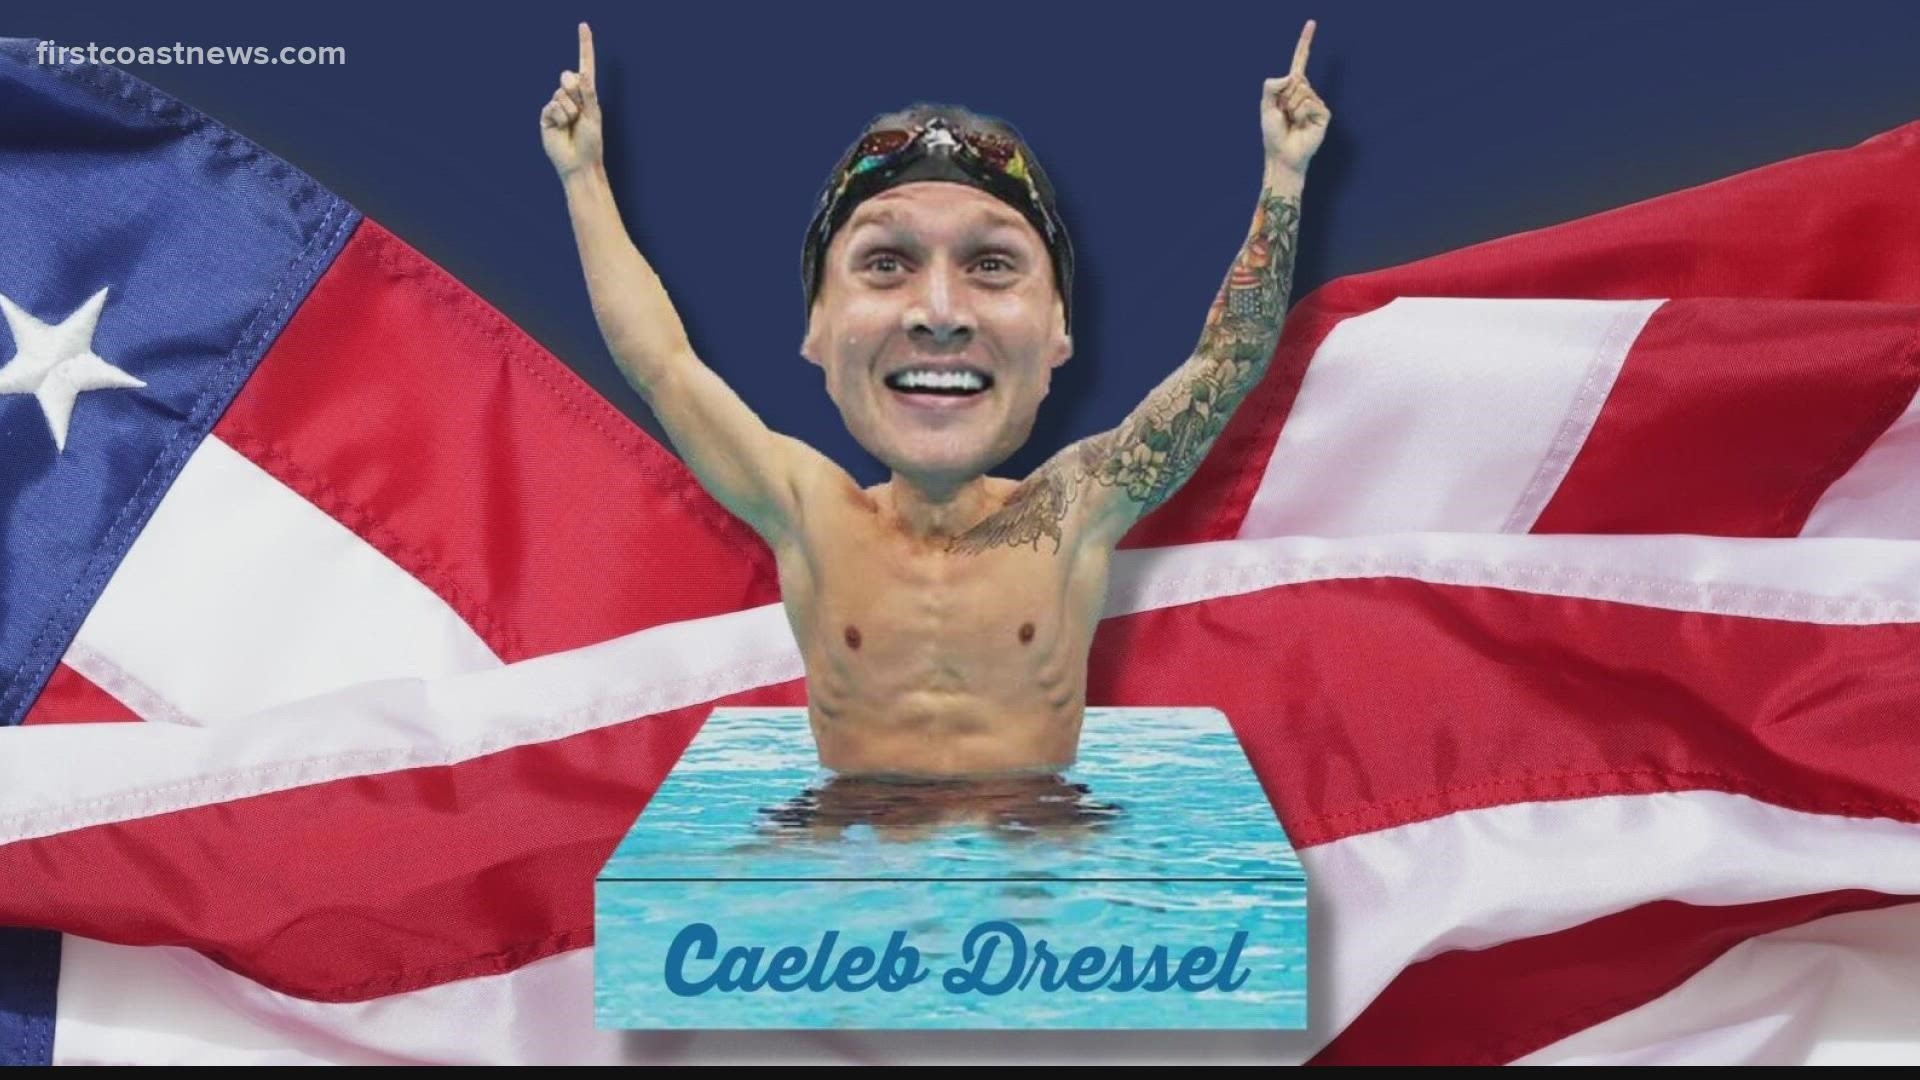 Jacksonville Olympian Caeleb Dressel has his own bobble head and some say that it doesn't represent his likeness.